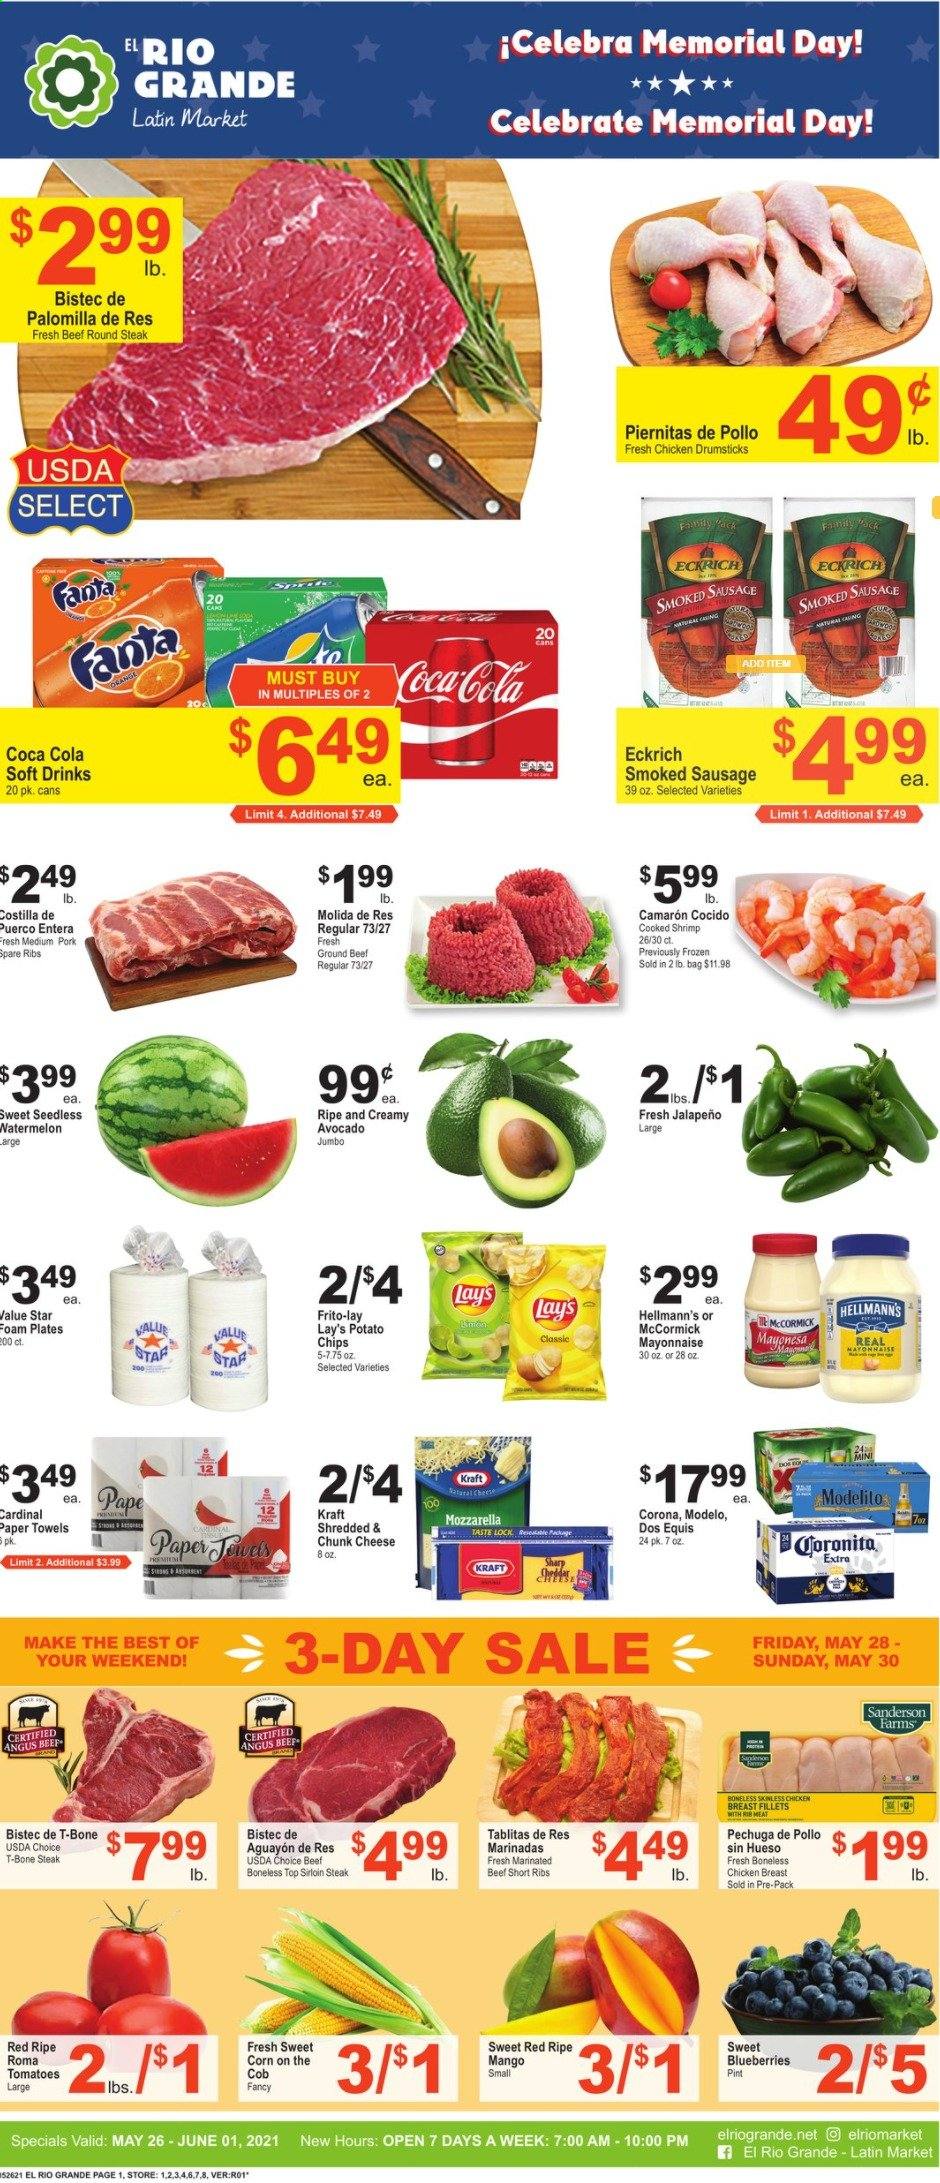 thumbnail - El Rio Grande Flyer - 05/26/2021 - 06/01/2021 - Sales products - Dos Equis, corn, tomatoes, jalapeño, sweet corn, avocado, blueberries, mango, watermelon, shrimps, Kraft®, sausage, smoked sausage, mozzarella, cheese, chunk cheese, mayonnaise, Hellmann’s, potato chips, Lay’s, Frito-Lay, Coca-Cola, soft drink, beer, Corona Extra, Modelo, chicken breasts, chicken drumsticks, beef meat, beef ribs, beef sirloin, ground beef, t-bone steak, steak, round steak, sirloin steak, marinated beef, pork meat, pork ribs, pork spare ribs. Page 1.